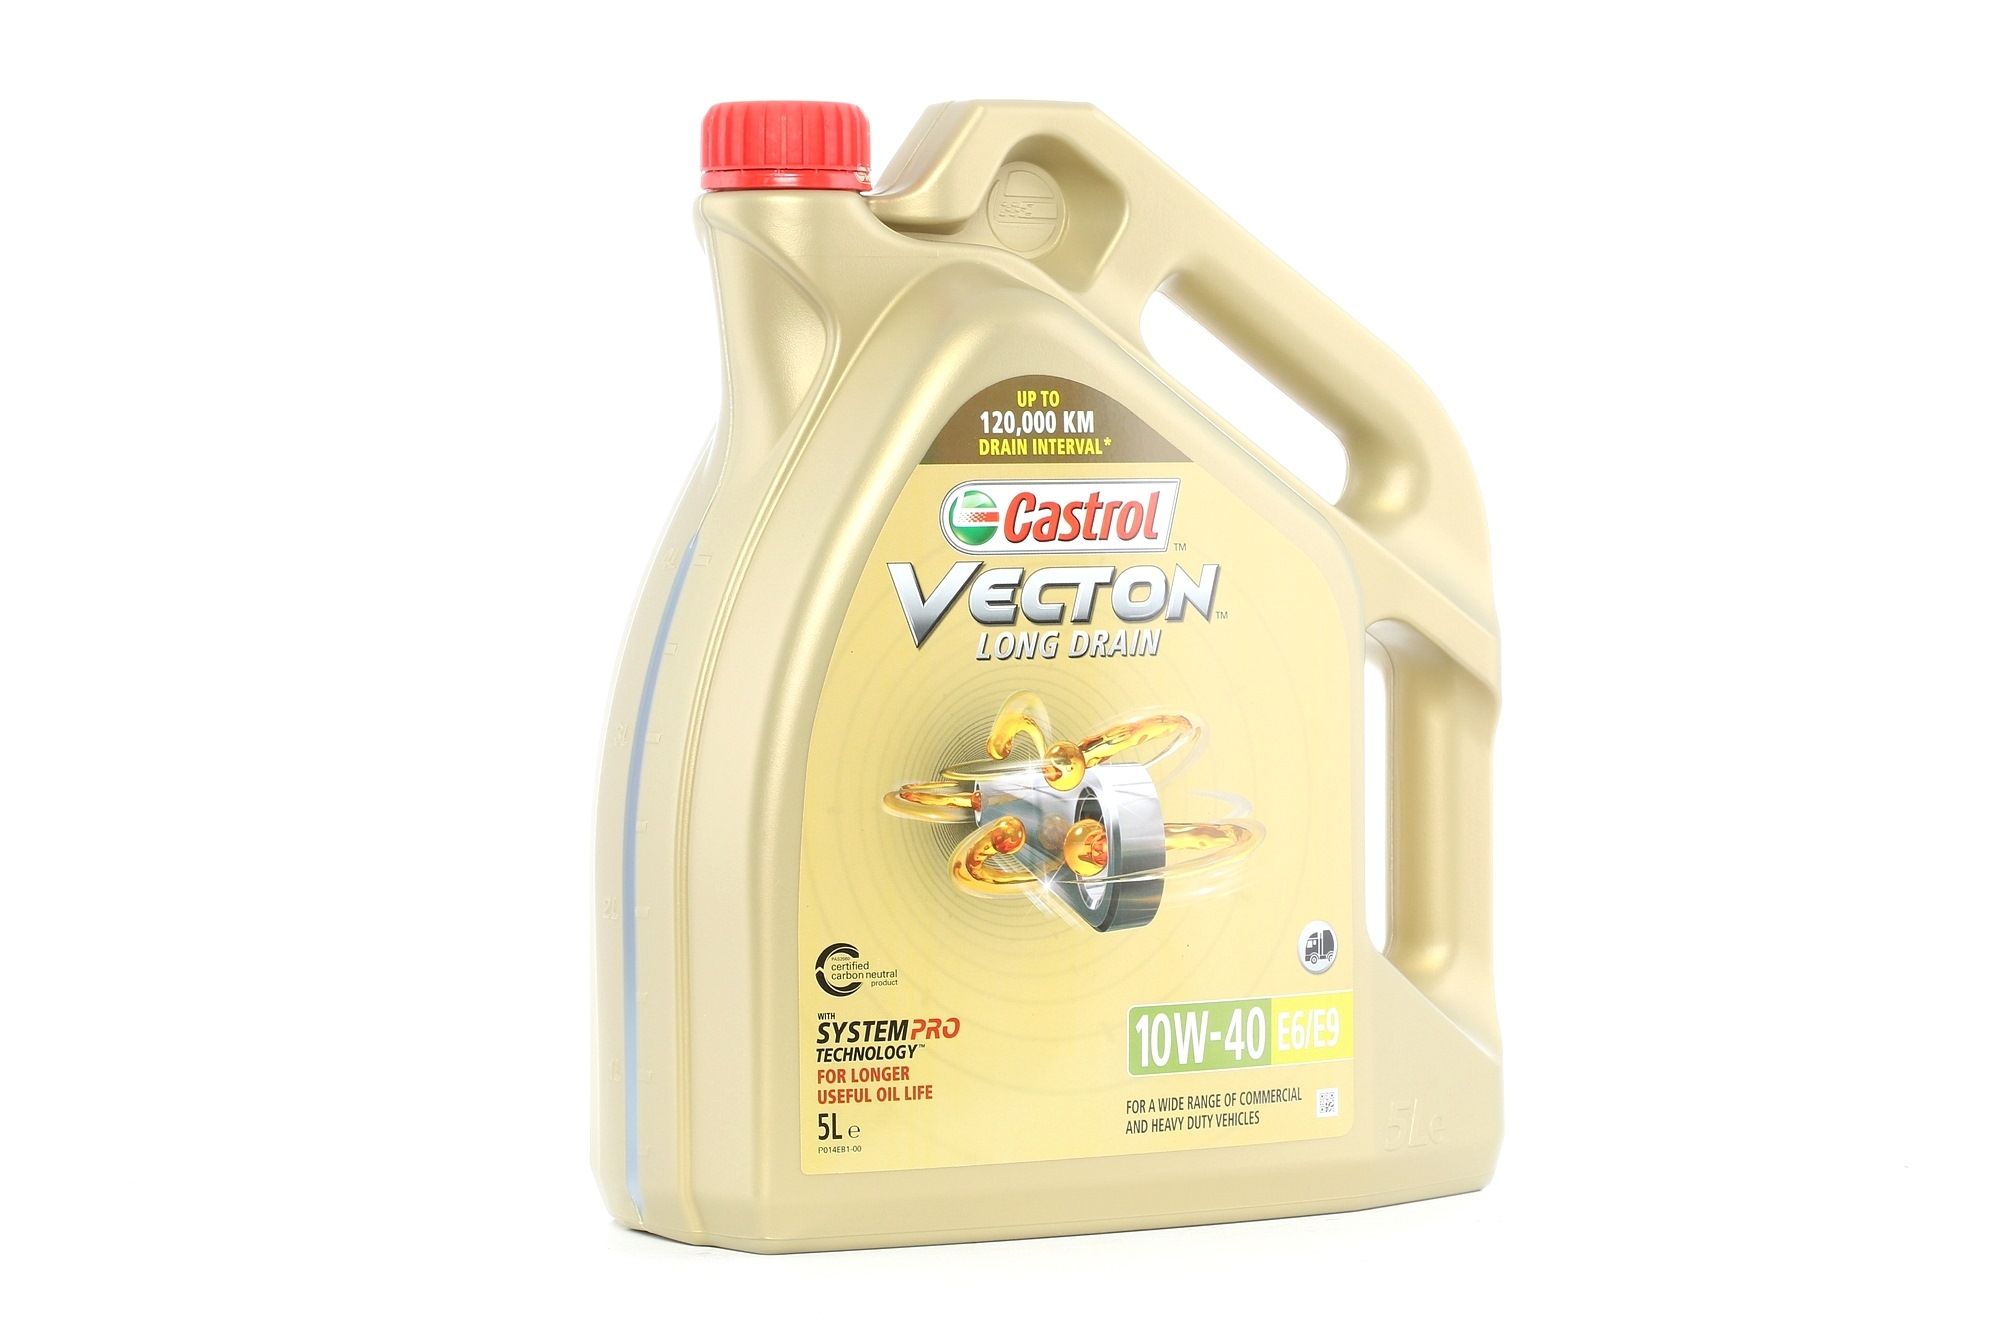 CASTROL 154AC9 Engine oil cheap in online store